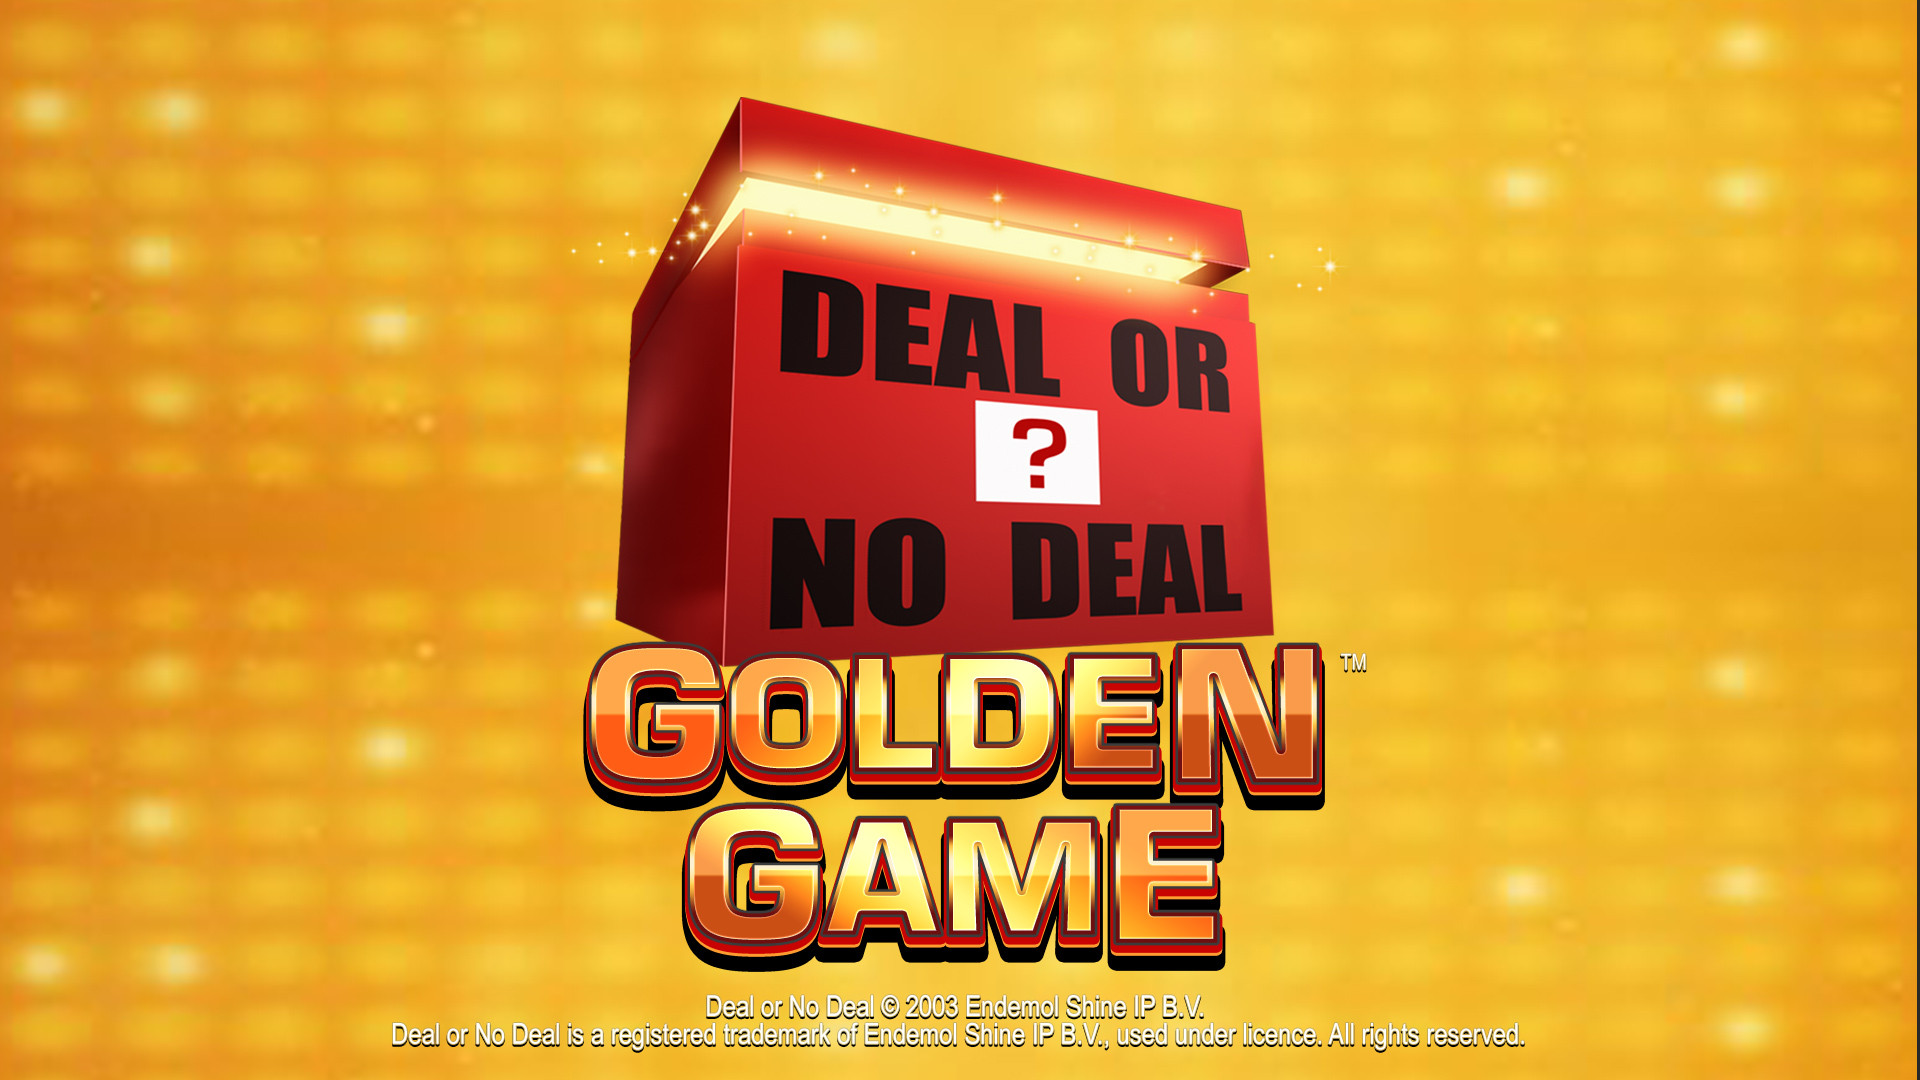 Deal Or No Deal: The Golden Game